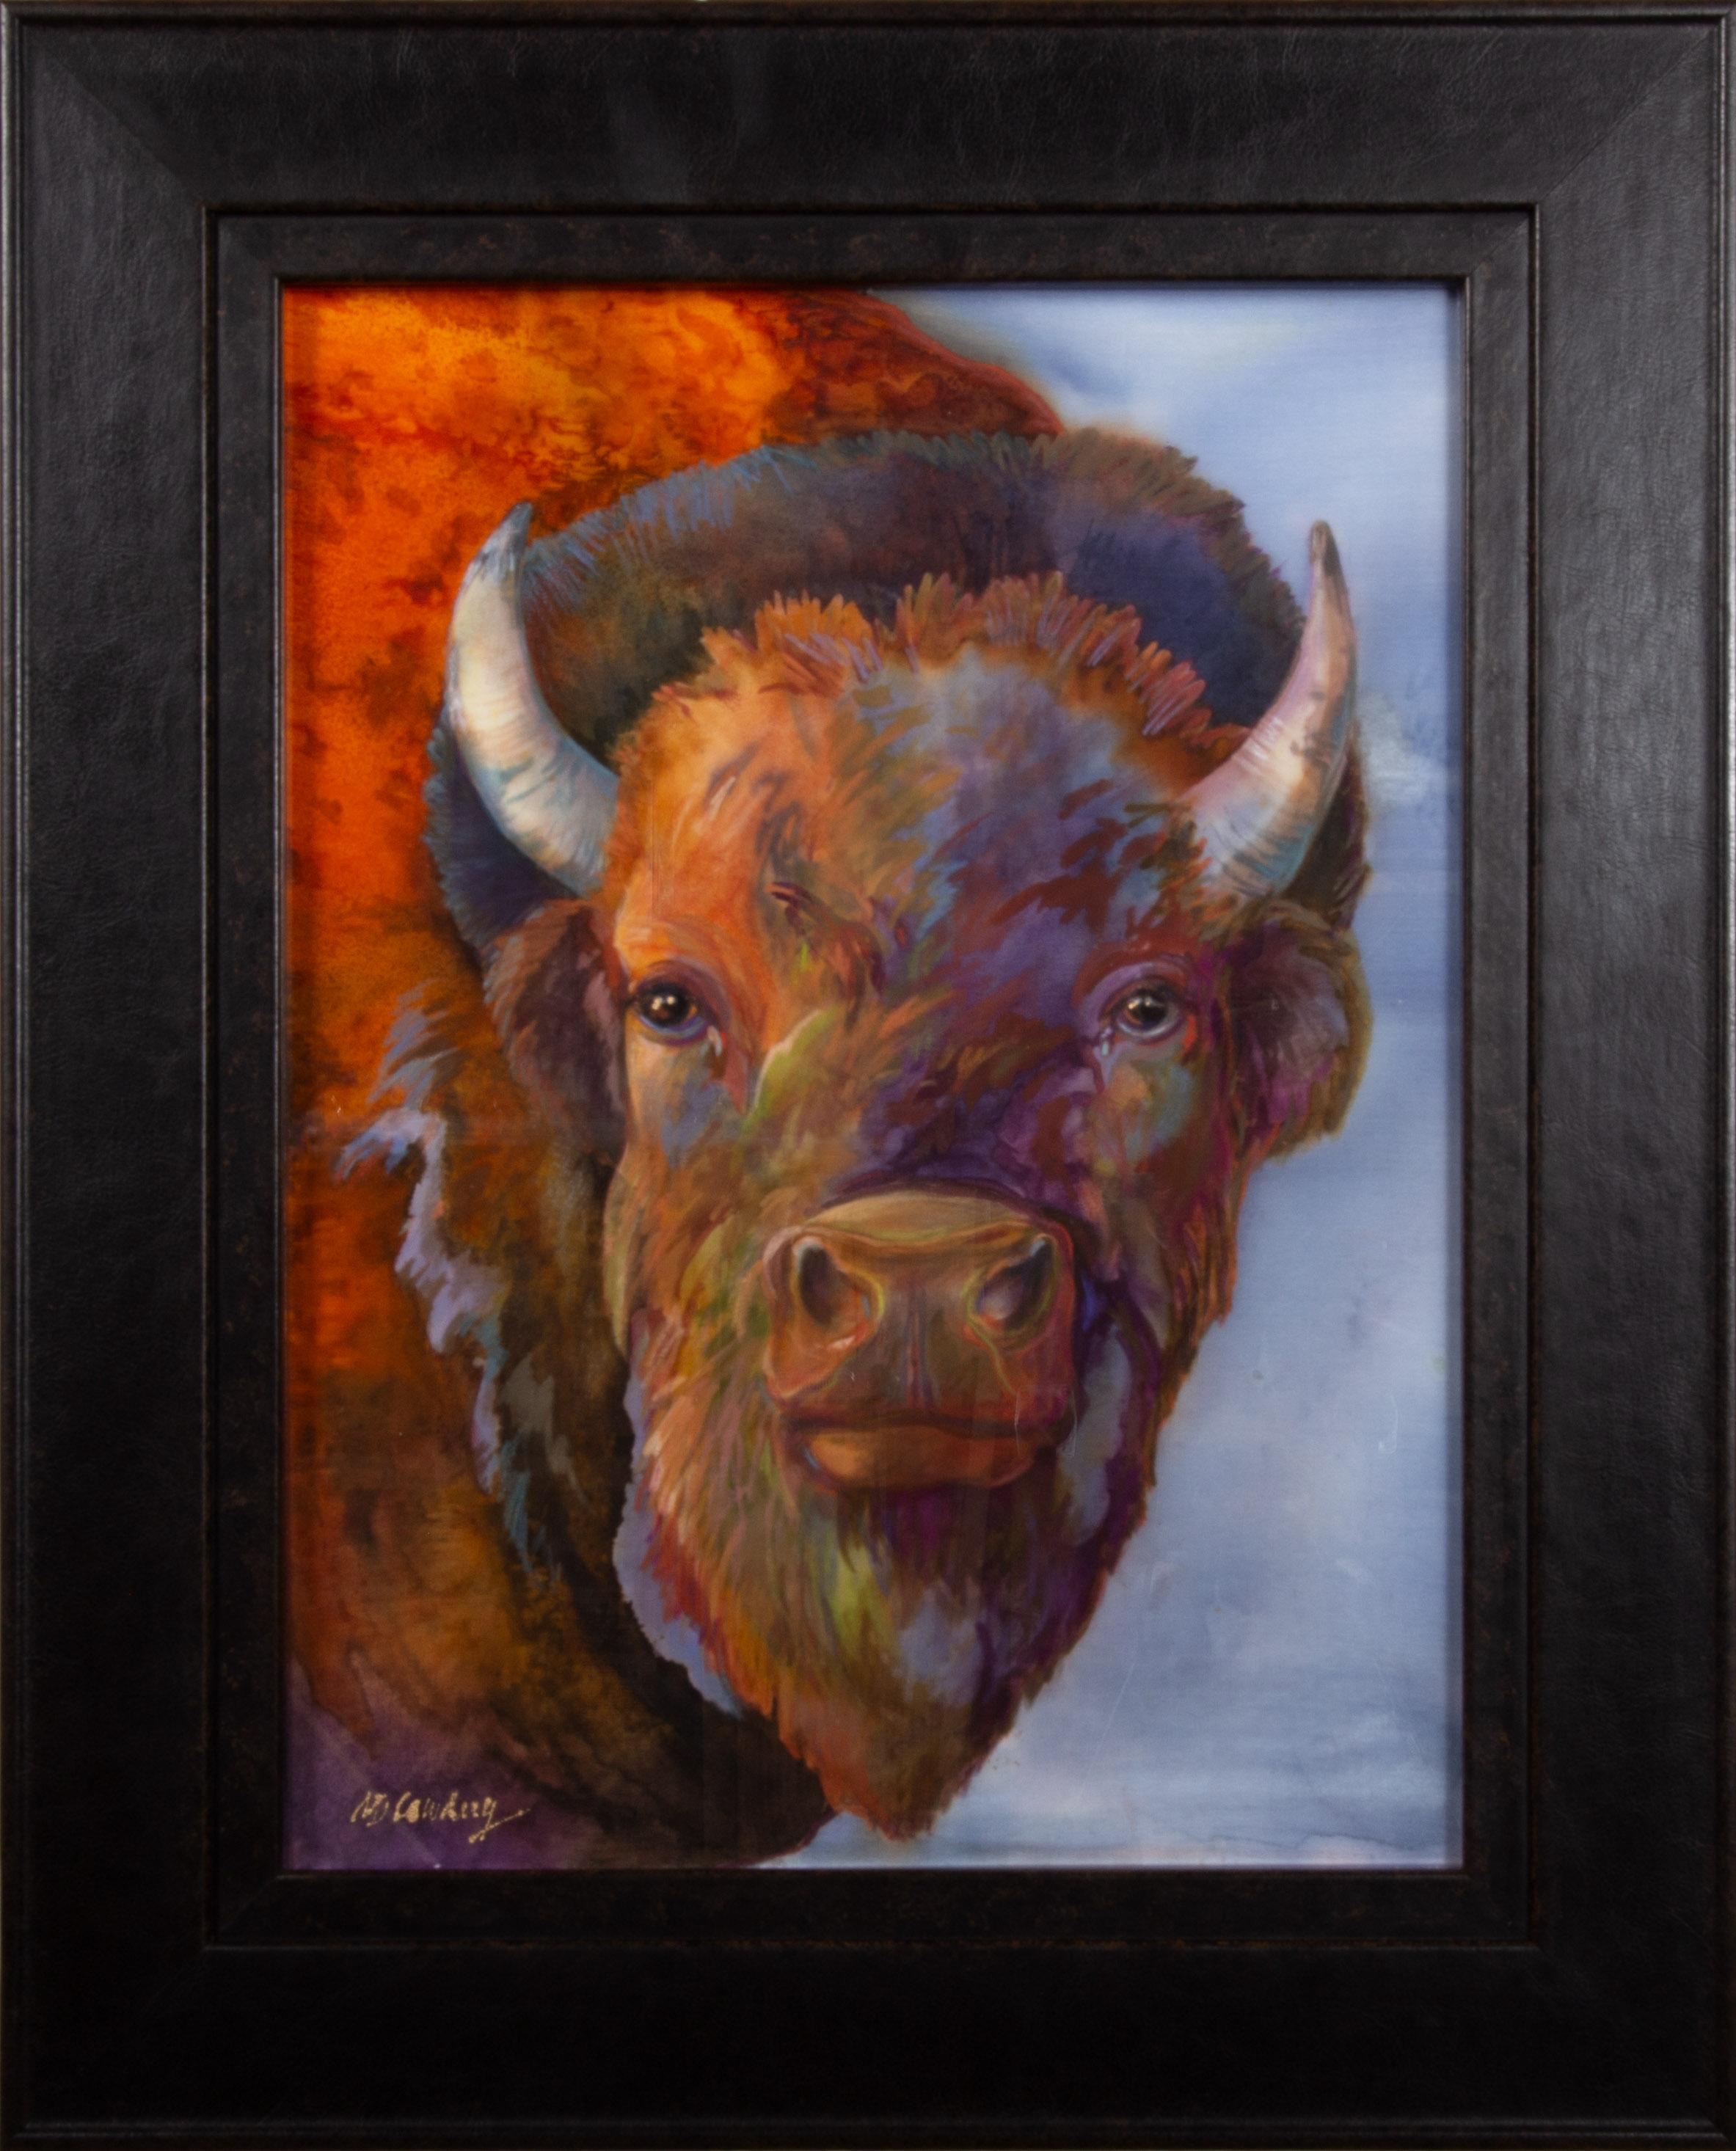 "Close Encounter" by Nancy Dunlop Cawdrey, Dye on Silk, 16" x 23", 21" x 17" framed in a black faux leather frame, signed lower left, hanging wire included.

Nancy Dunlop Cawdrey lives in a world of color. And she likes to paint that way as well.